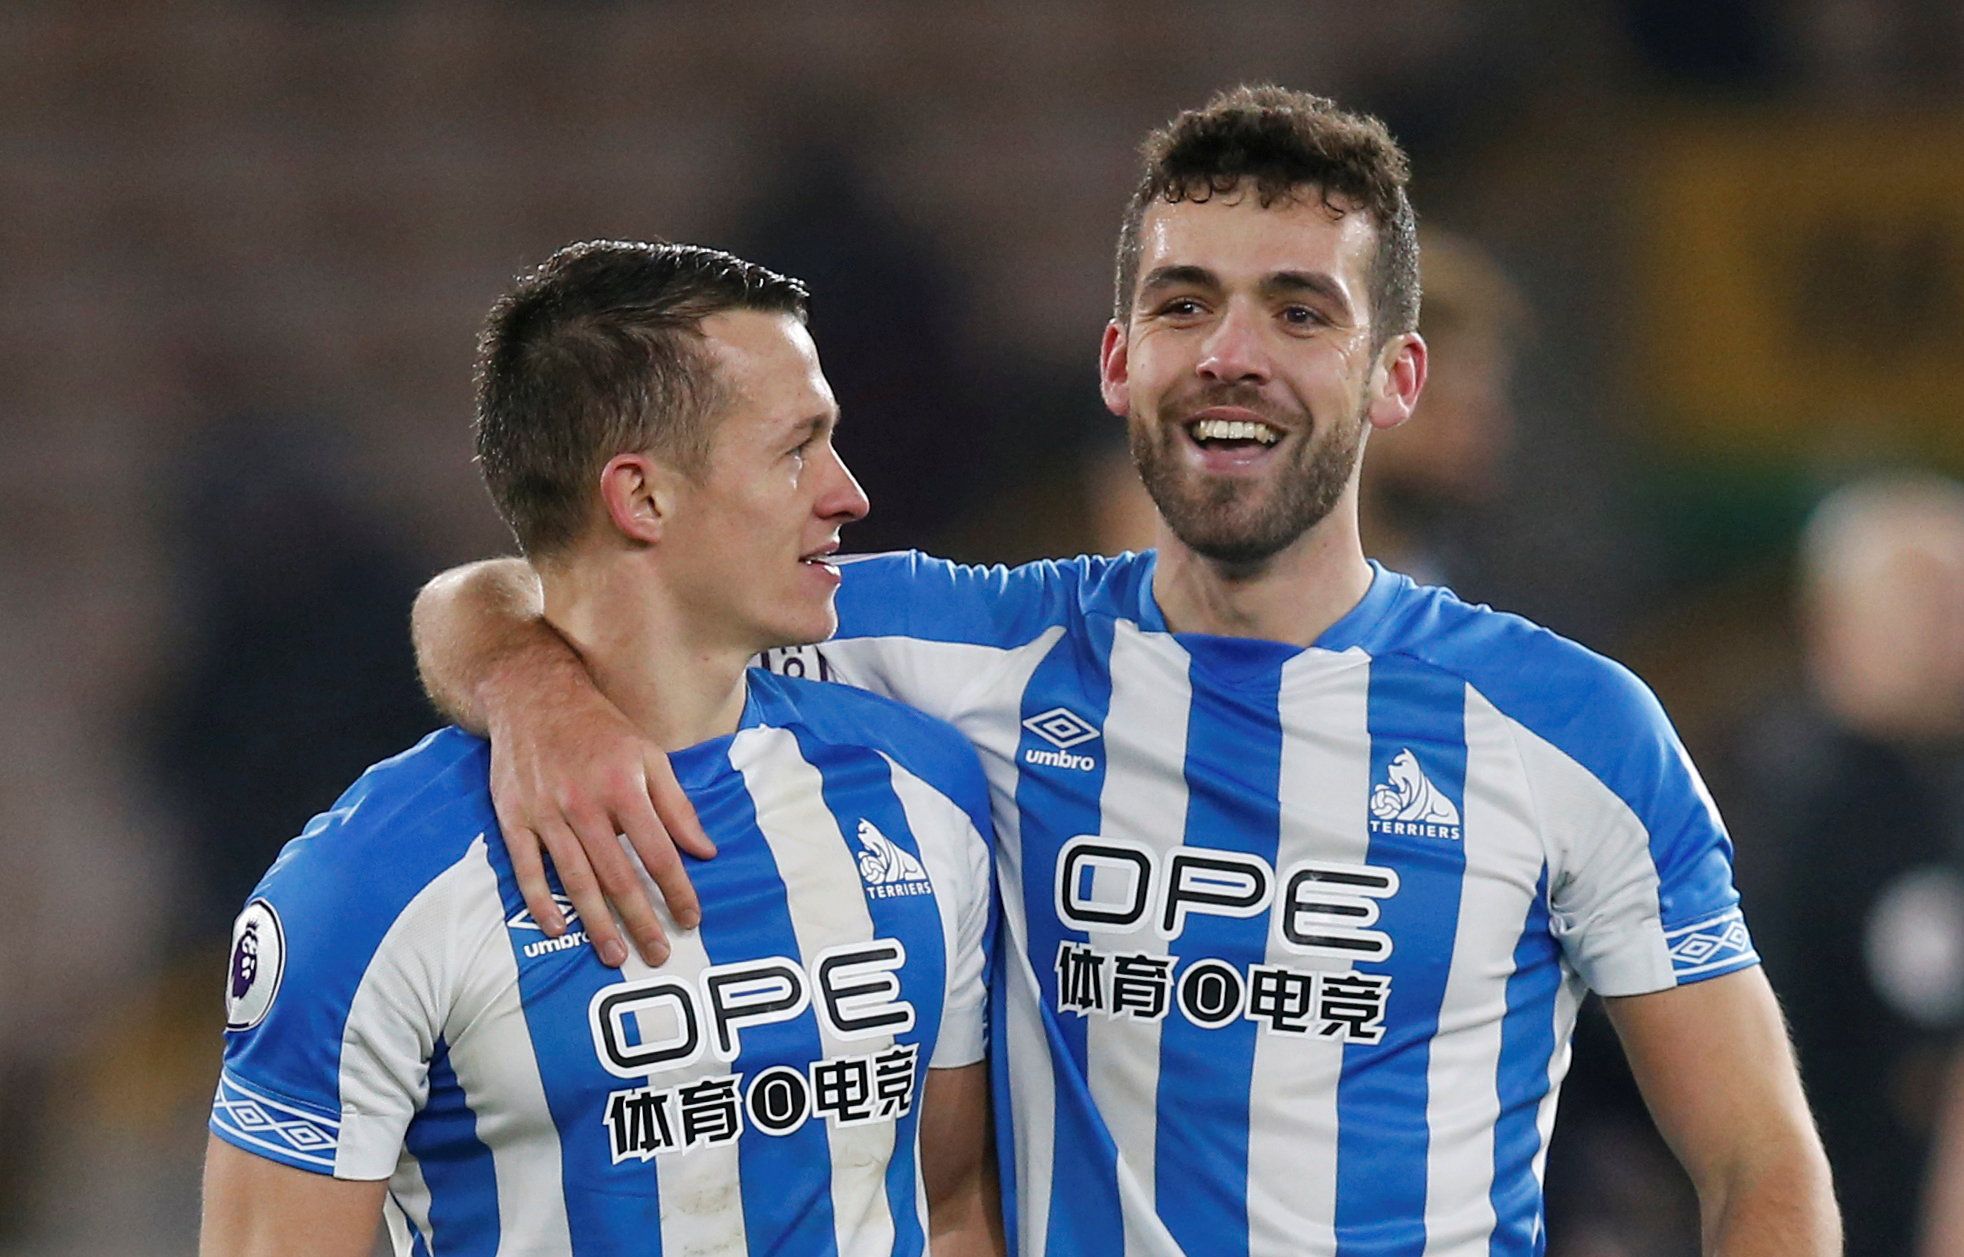 Soccer Football - Premier League - Wolverhampton Wanderers v Huddersfield Town - Molineux Stadium, Wolverhampton, Britain - November 25, 2018  Huddersfield Town's Tommy Smith and Jonathan Hogg celebrate victory after the match   REUTERS/Andrew Yates  EDITORIAL USE ONLY. No use with unauthorized audio, video, data, fixture lists, club/league logos or 